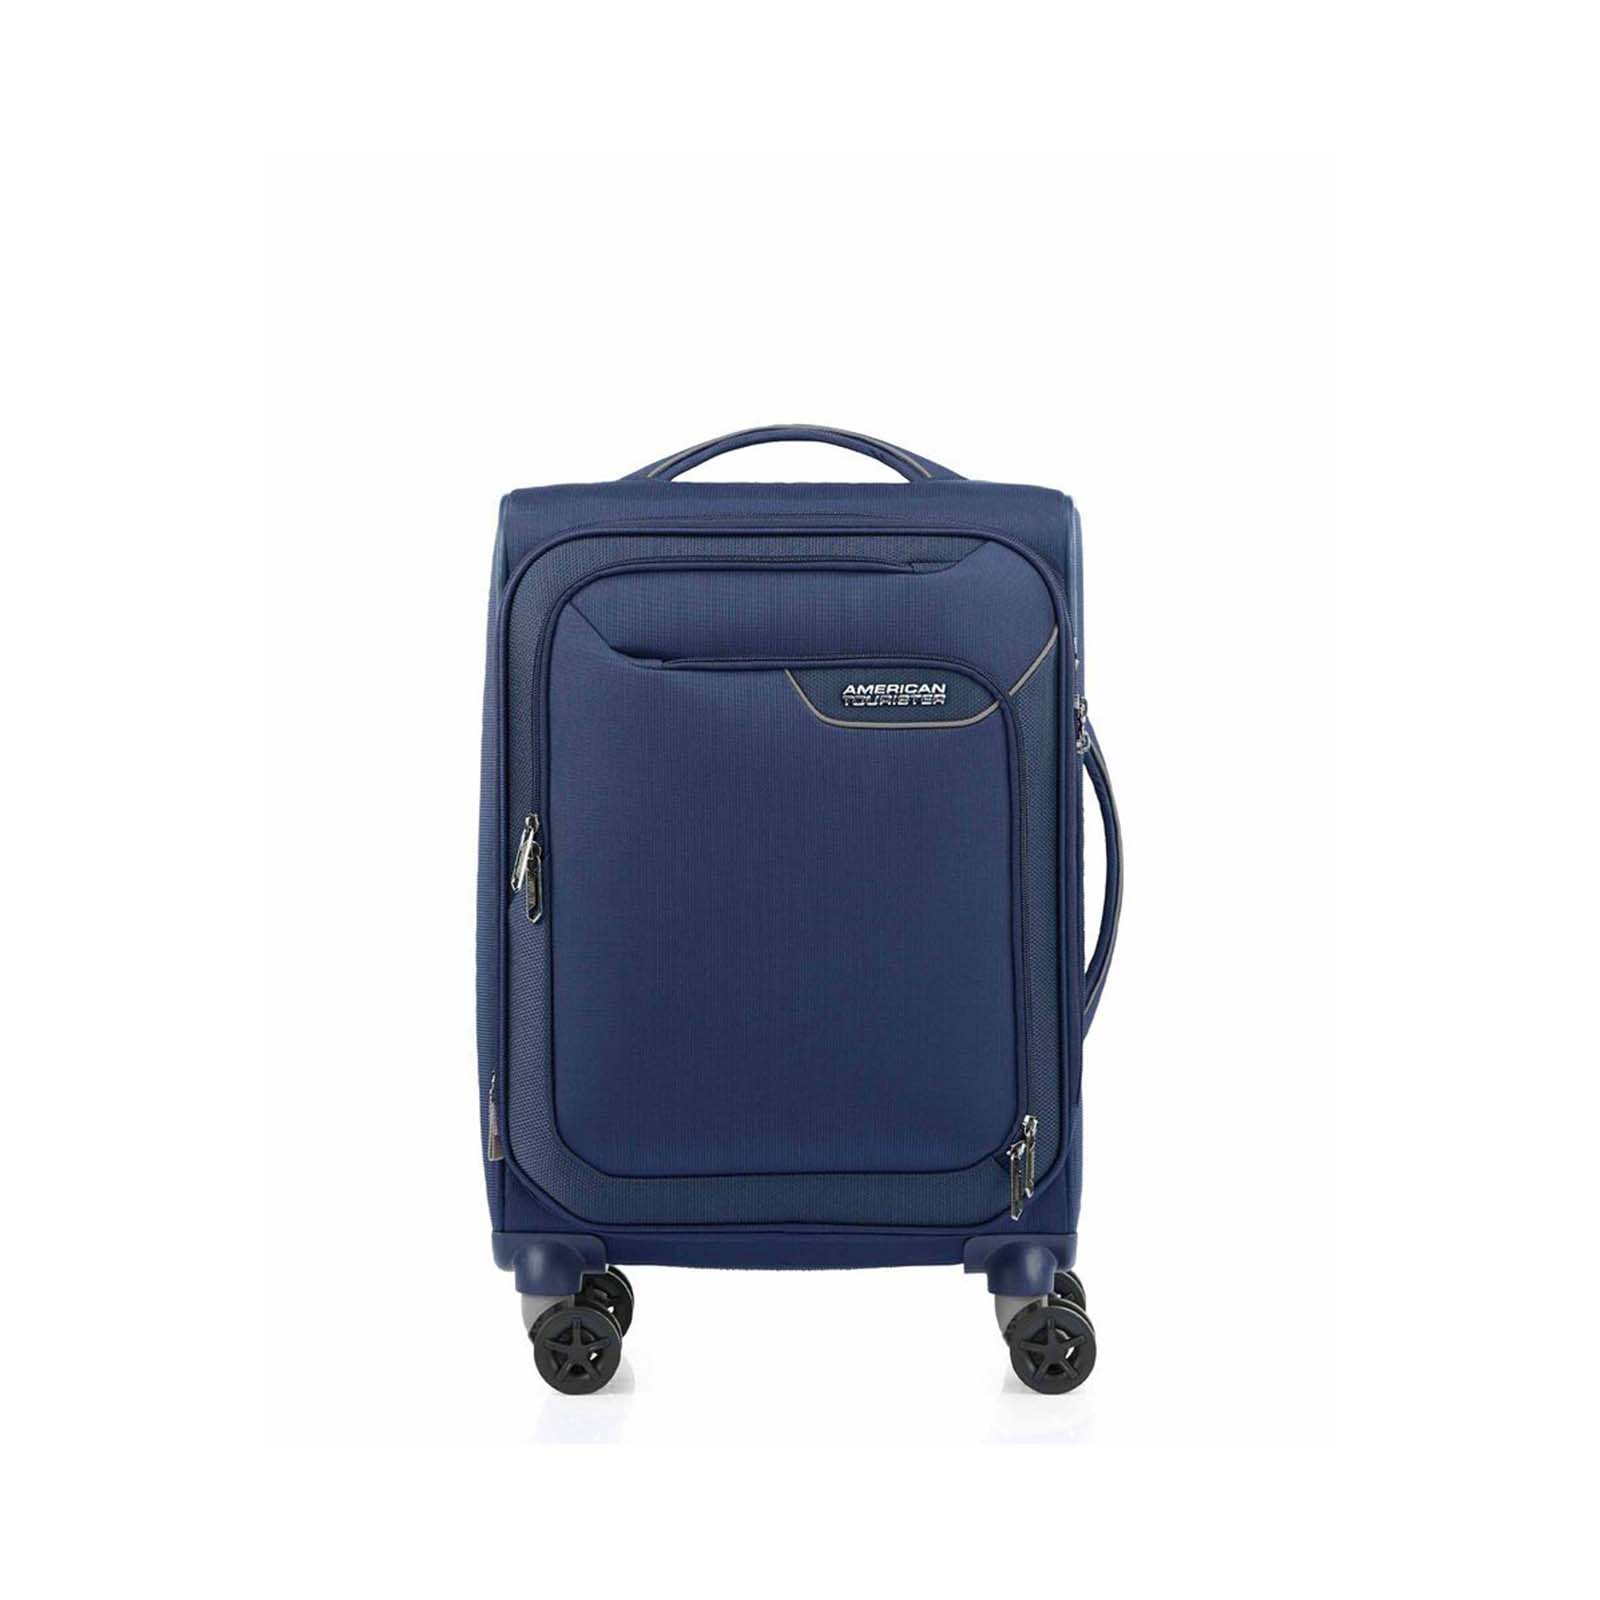 American-Tourister-Applite-4-Eco-55cm-Carry-On-Suitcase-Navy-Front